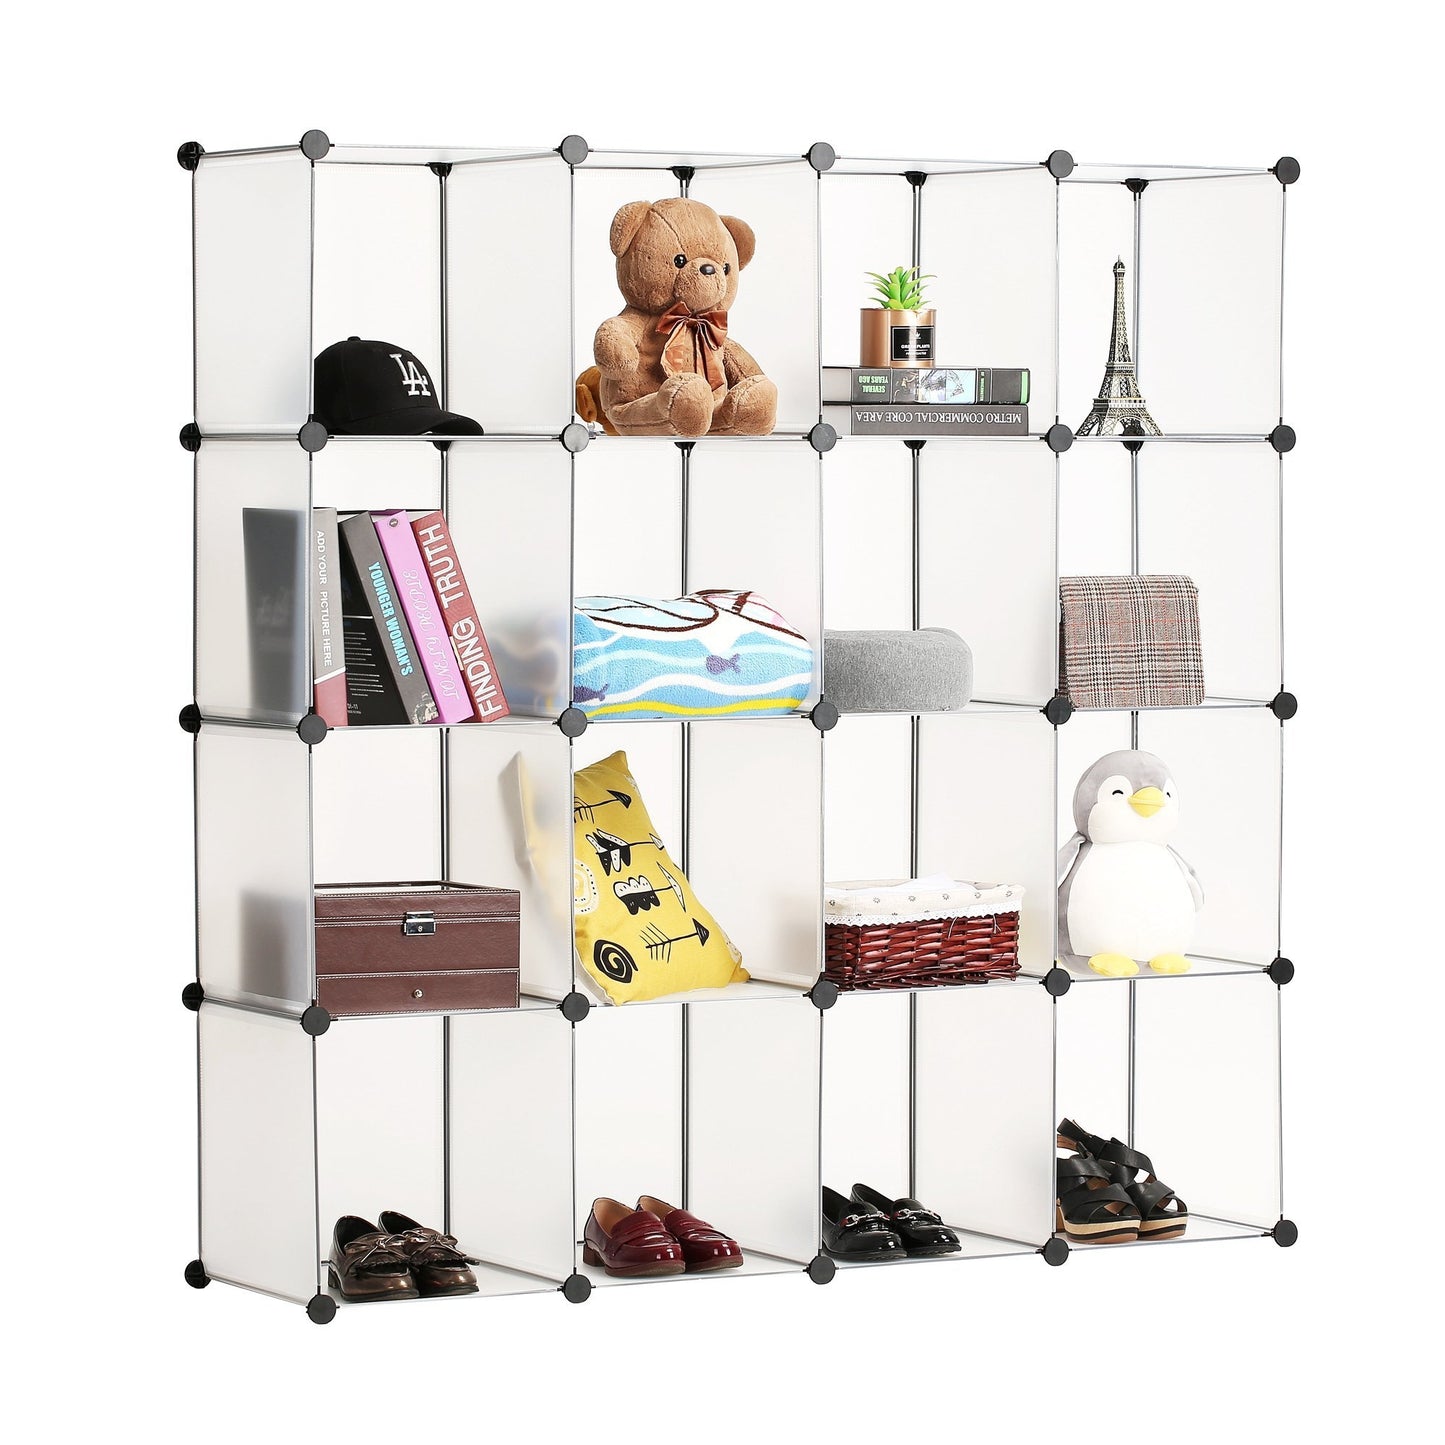 Best bastuo 16 cubes diy storage cabinet clothes wardrobe closet bookcase shelf baskets modular cubes closet for toys books clothes white with doors